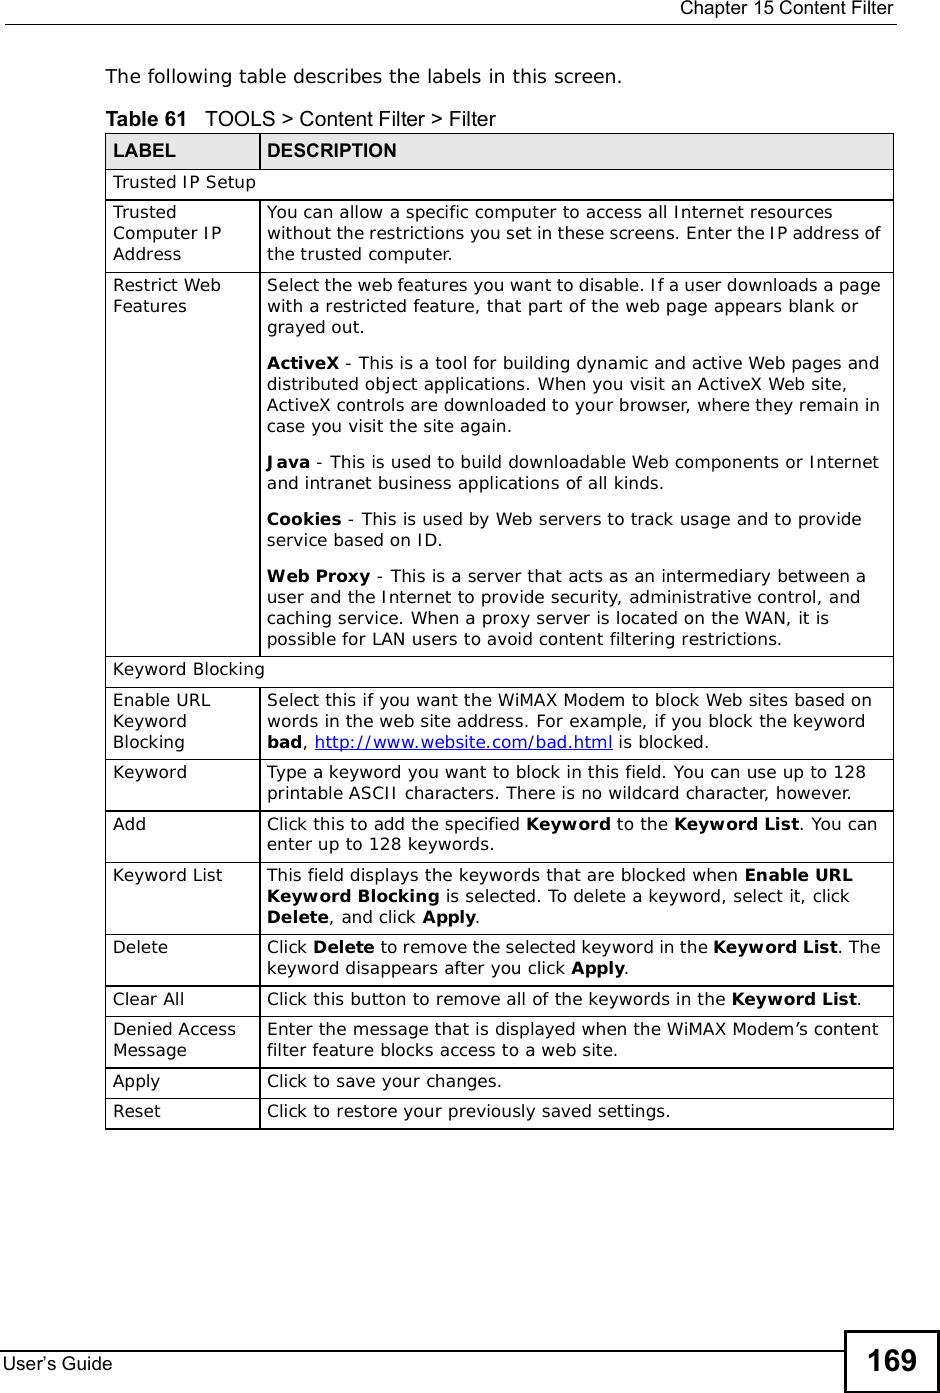  Chapter 15Content FilterUser s Guide 169The following table describes the labels in this screen.  Table 61   TOOLS &gt; Content Filter &gt; FilterLABEL DESCRIPTIONTrusted IP SetupTrusted Computer IP AddressYou can allow a specific computer to access all Internet resources without the restrictions you set in these screens. Enter the IP address of the trusted computer.Restrict Web Features Select the web features you want to disable. If a user downloads a page with a restricted feature, that part of the web page appears blank or grayed out.ActiveX - This is a tool for building dynamic and active Web pages and distributed object applications. When you visit an ActiveX Web site, ActiveX controls are downloaded to your browser, where they remain in case you visit the site again.Java - This is used to build downloadable Web components or Internet and intranet business applications of all kinds.Cookies - This is used by Web servers to track usage and to provide service based on ID.Web Proxy - This is a server that acts as an intermediary between a user and the Internet to provide security, administrative control, and caching service. When a proxy server is located on the WAN, it is possible for LAN users to avoid content filtering restrictions.Keyword BlockingEnable URL Keyword BlockingSelect this if you want the WiMAX Modem to block Web sites based on words in the web site address. For example, if you block the keyword bad,http://www.website.com/bad.html is blocked.Keyword Type a keyword you want to block in this field. You can use up to 128 printable ASCII characters. There is no wildcard character, however.Add Click this to add the specified Keyword to the Keyword List. You can enter up to 128 keywords.Keyword List This field displays the keywords that are blocked when Enable URL Keyword Blocking is selected. To delete a keyword, select it, click Delete, and click Apply.Delete Click Delete to remove the selected keyword in the Keyword List. The keyword disappears after you click Apply.Clear All Click this button to remove all of the keywords in the Keyword List.Denied Access Message Enter the message that is displayed when the WiMAX Modem’s content filter feature blocks access to a web site.Apply Click to save your changes.Reset Click to restore your previously saved settings.